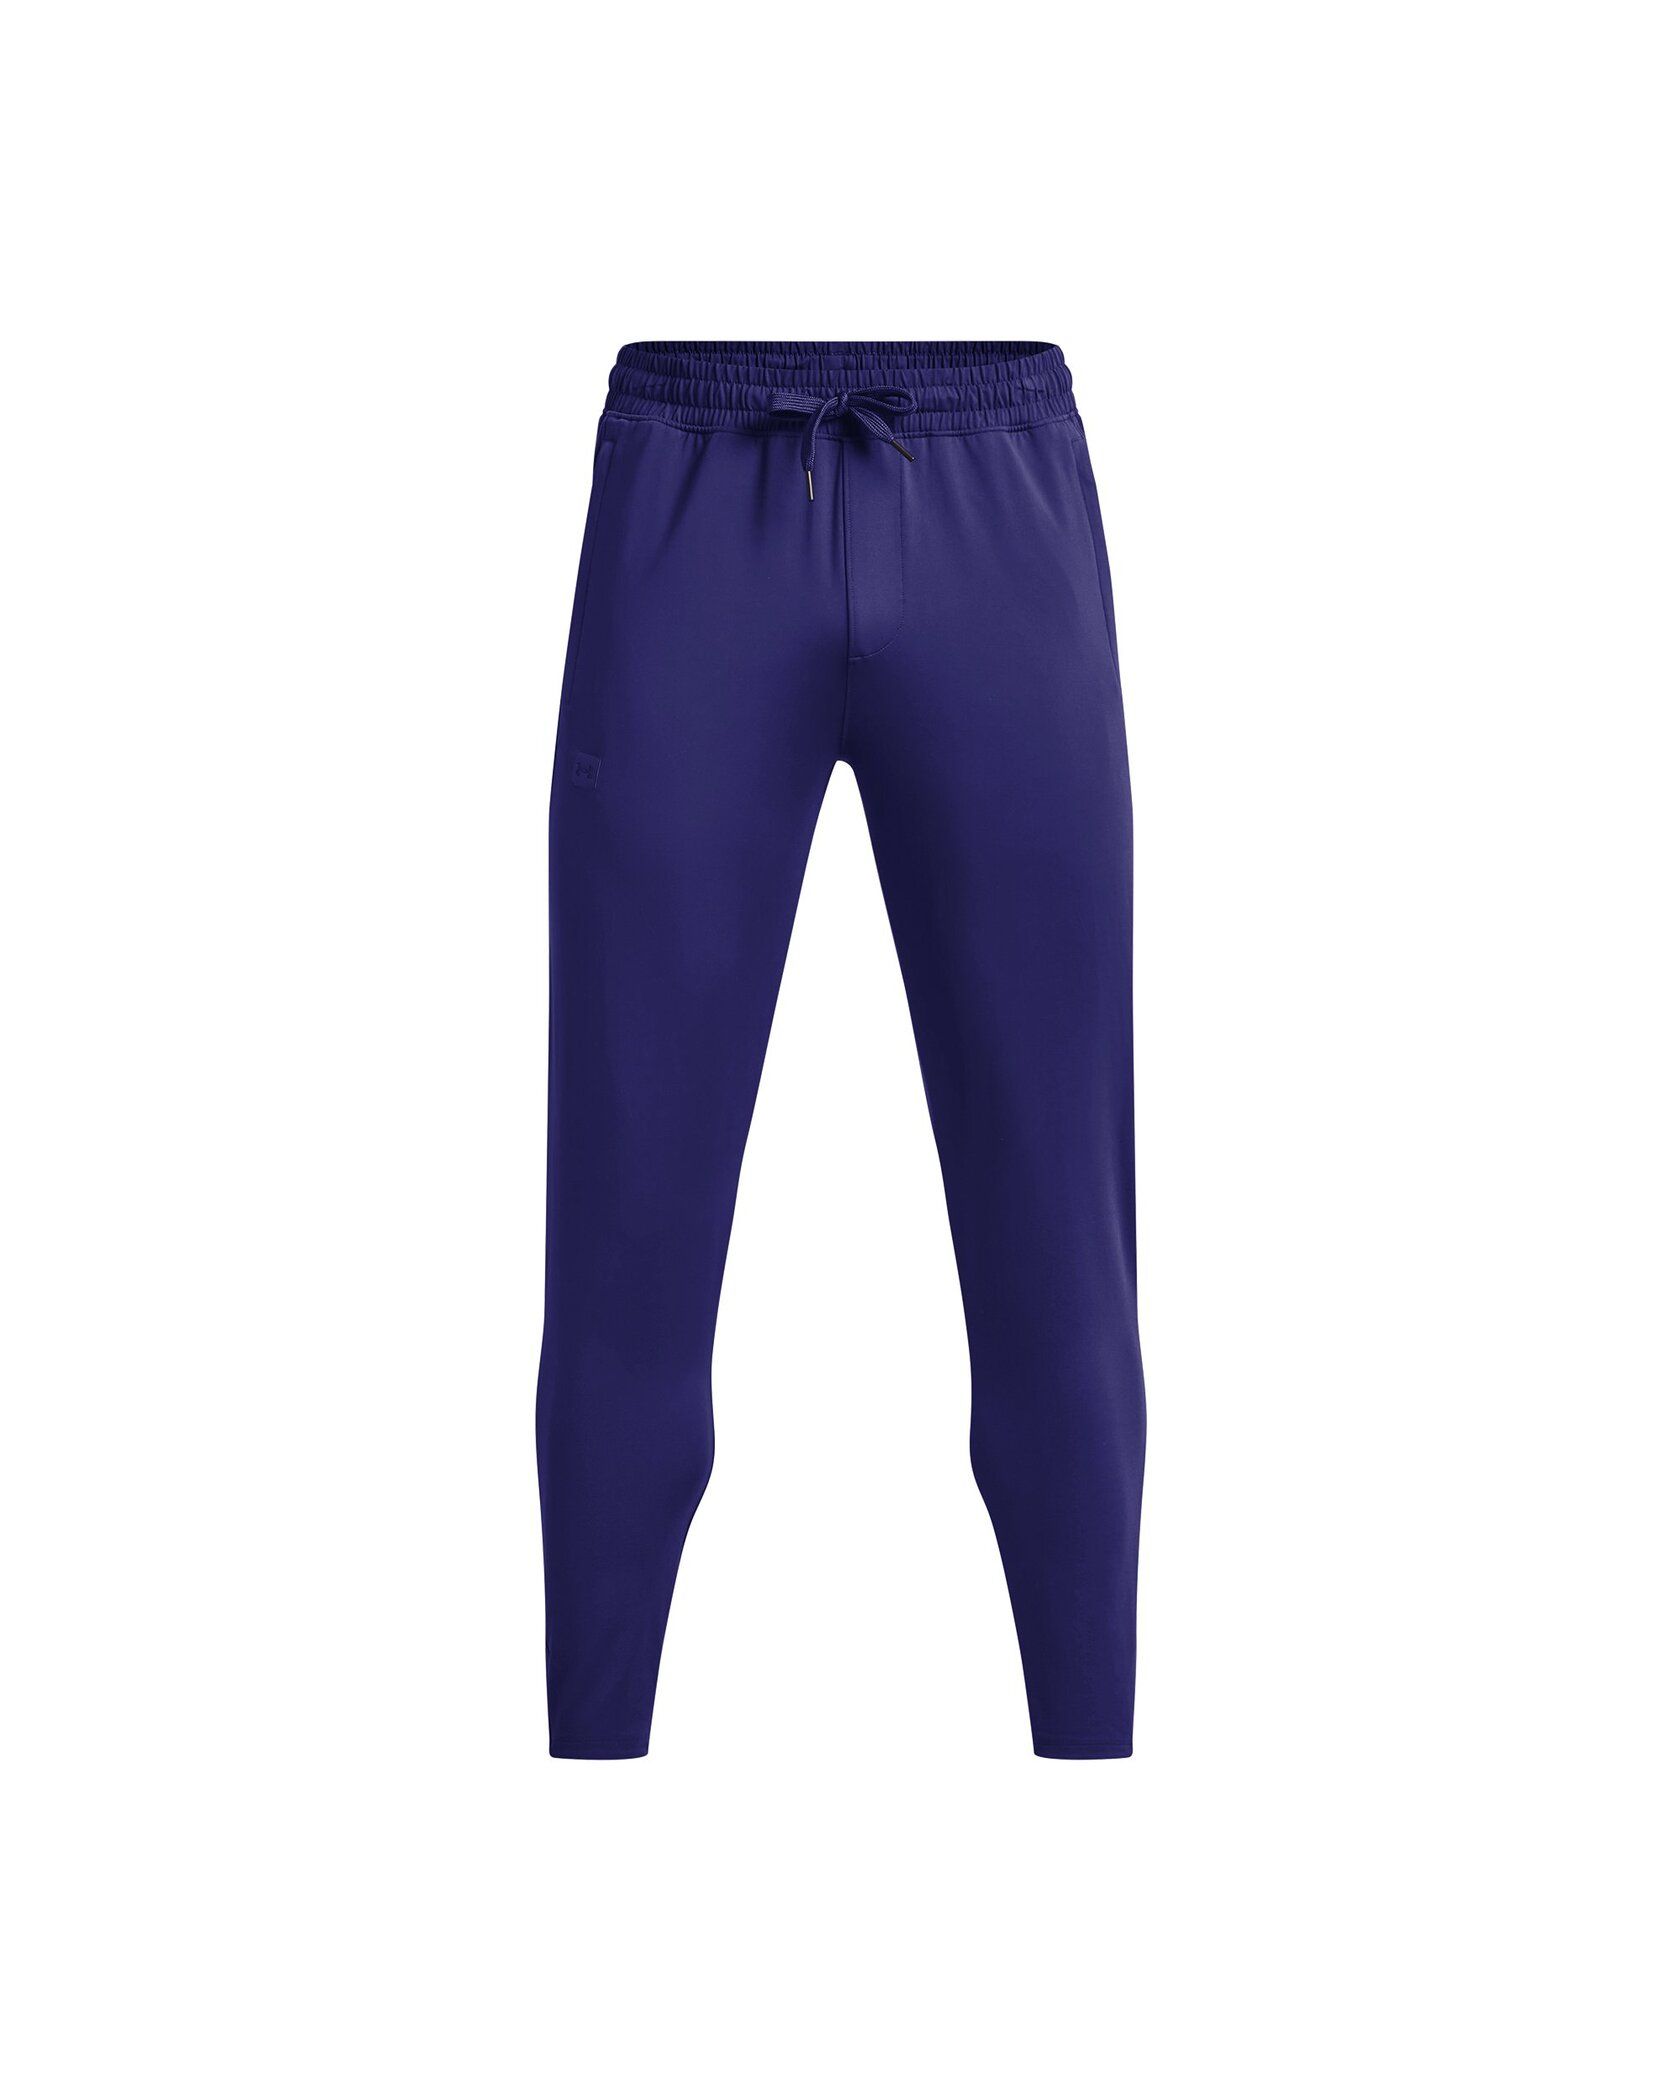 Under Armour Meridian Tapered Pants Black 1373730-001 - Free